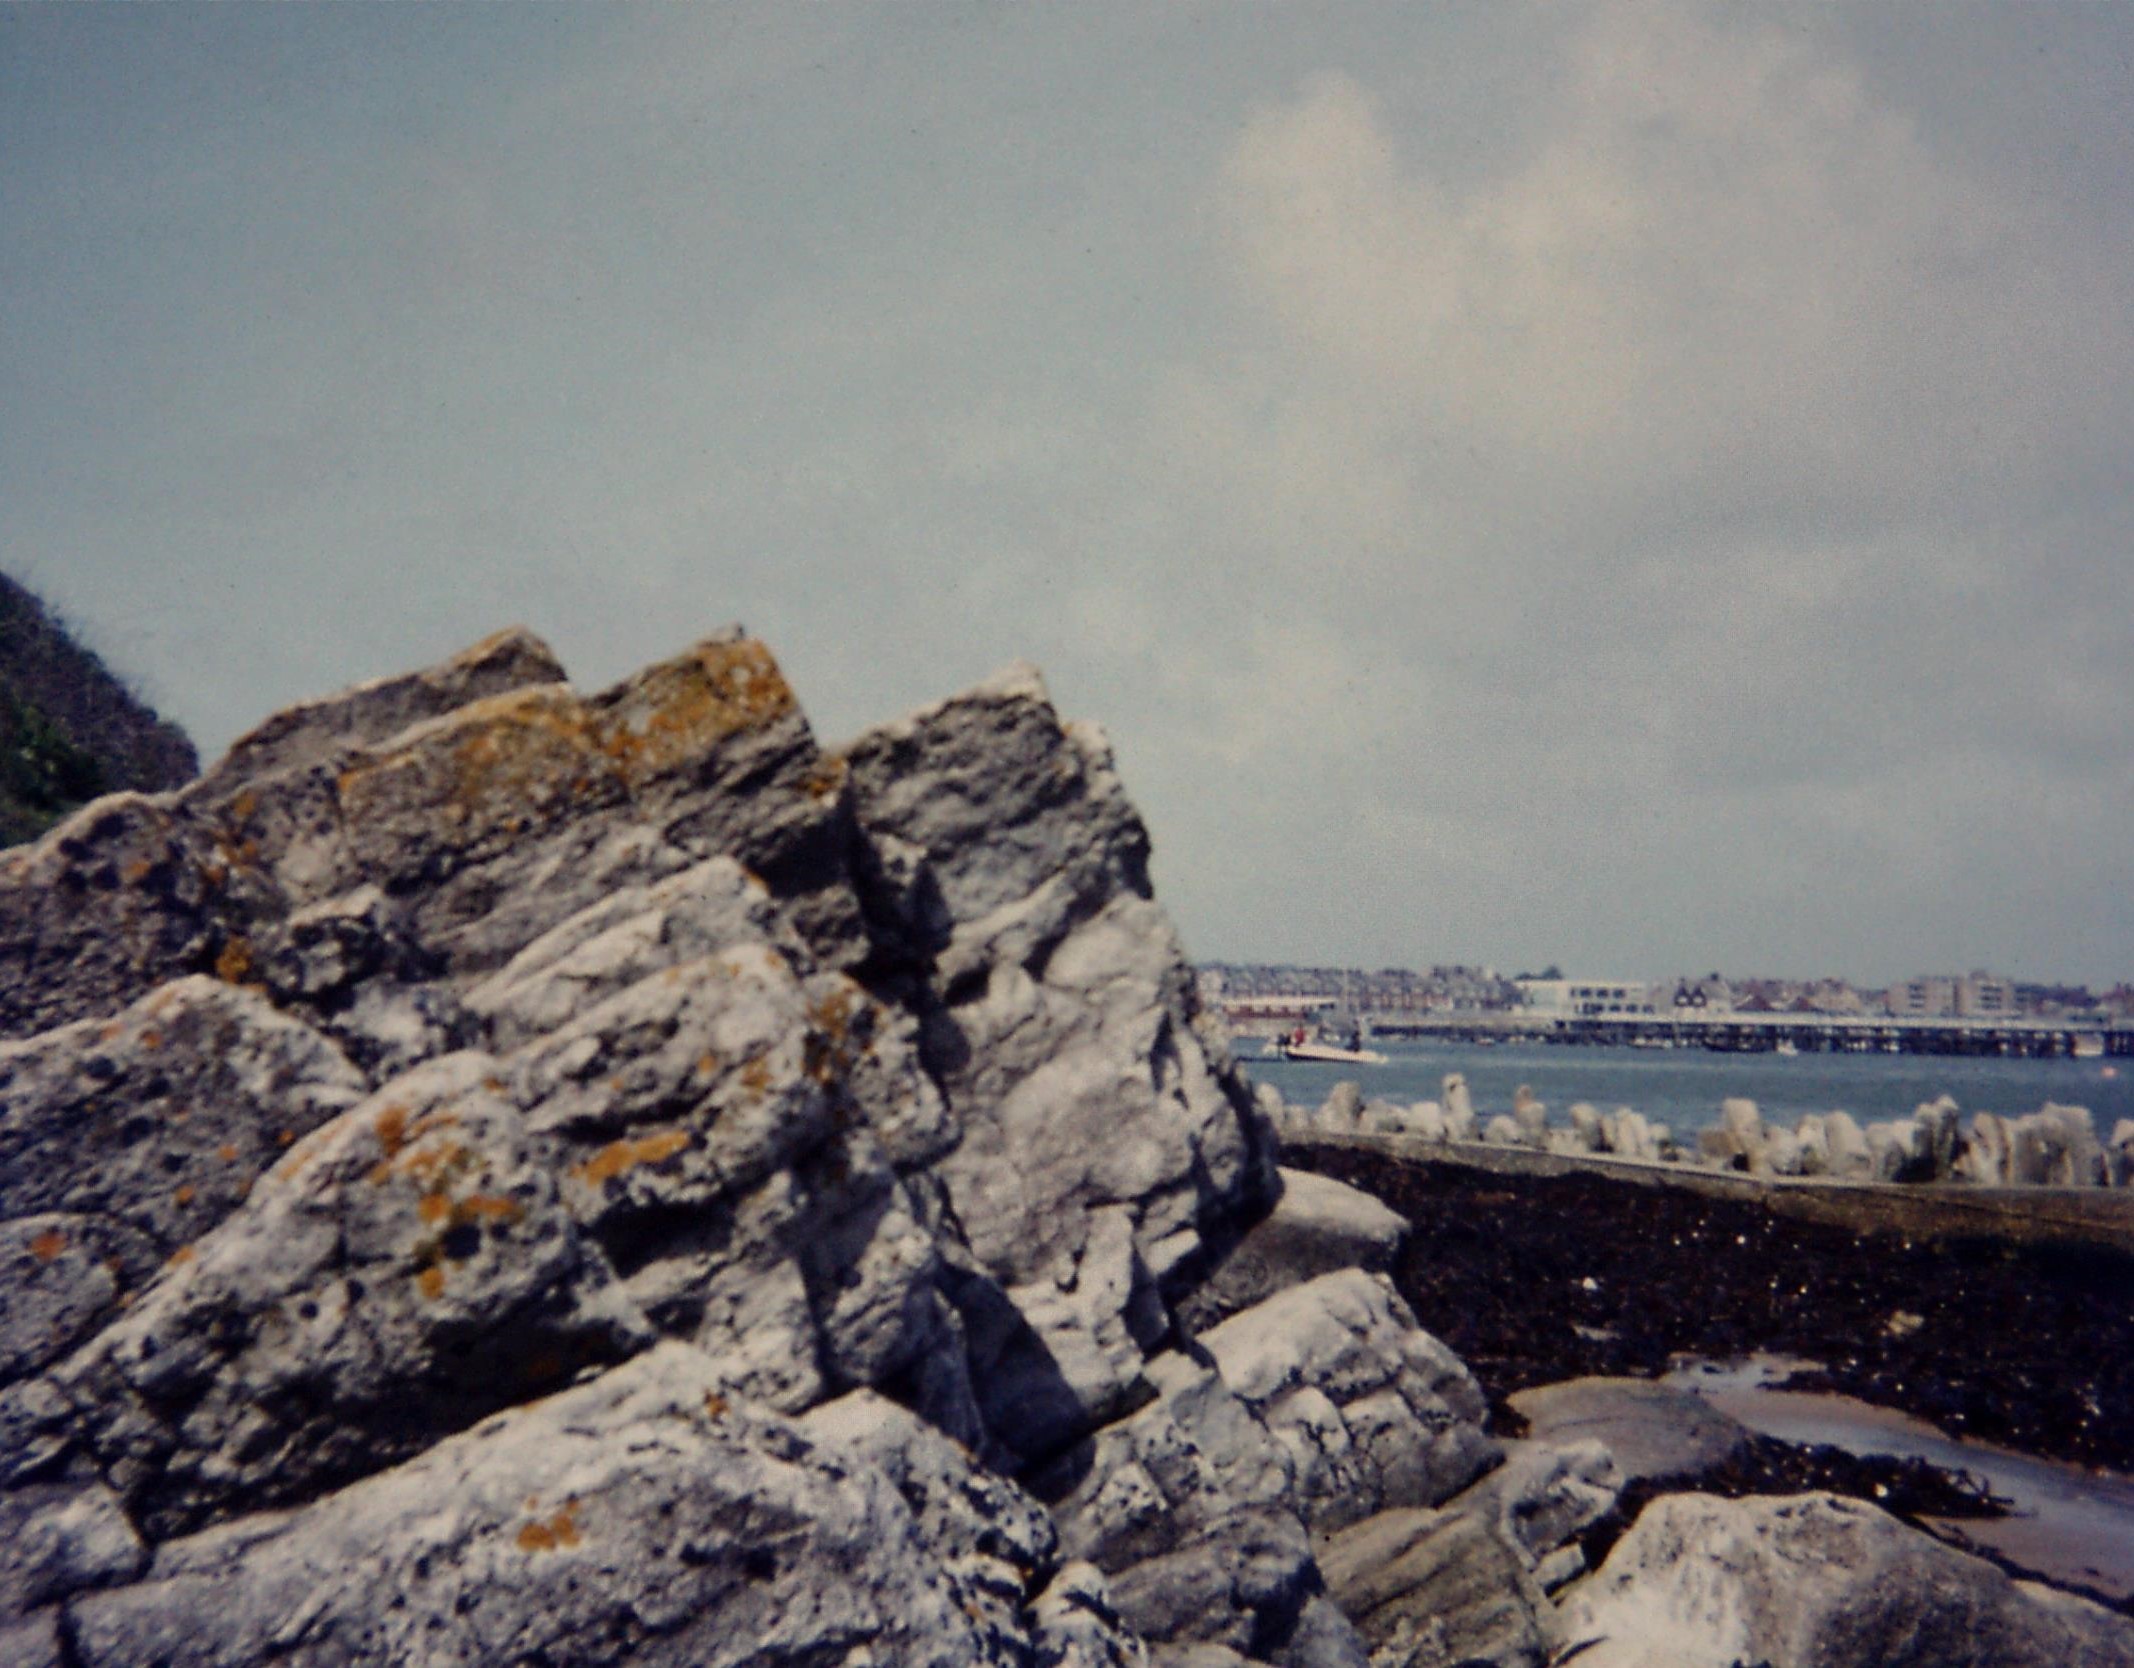 1979 Dorset. Swanage from Peveril Point. Purbeck Group limestones